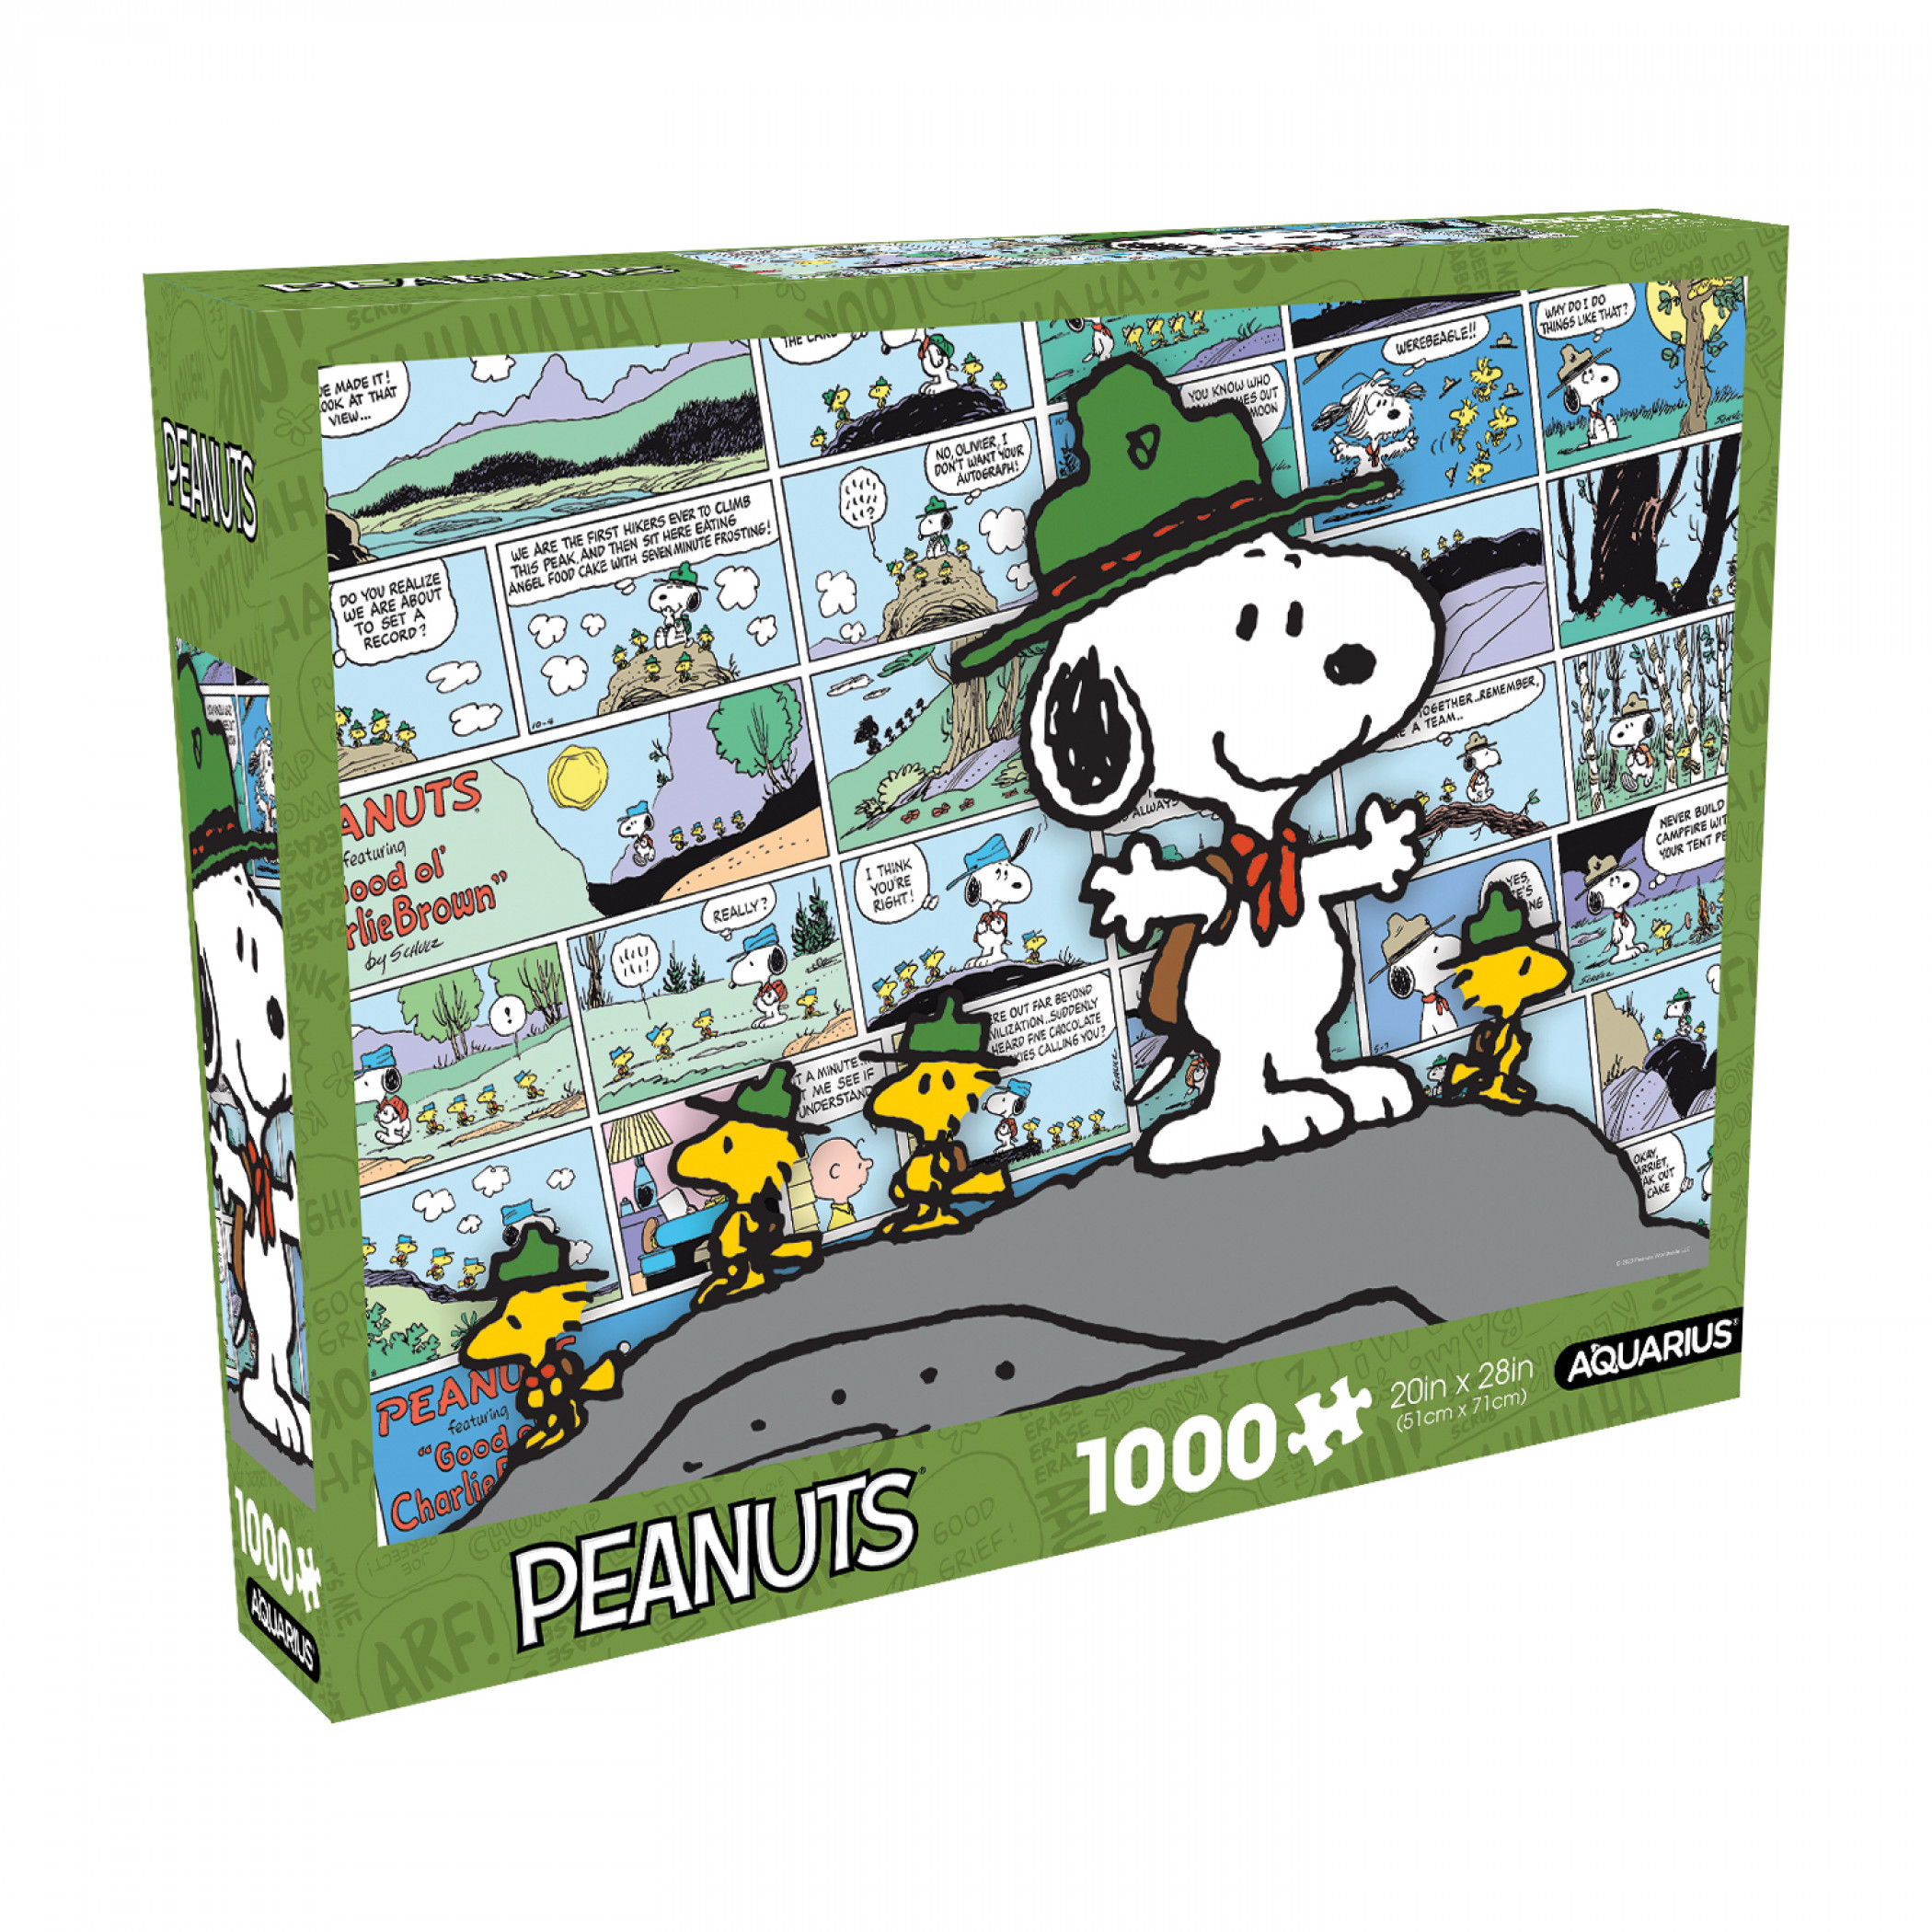 Peanuts Beagle Scouts Strips 1,000 Piece Jigsaw Puzzle